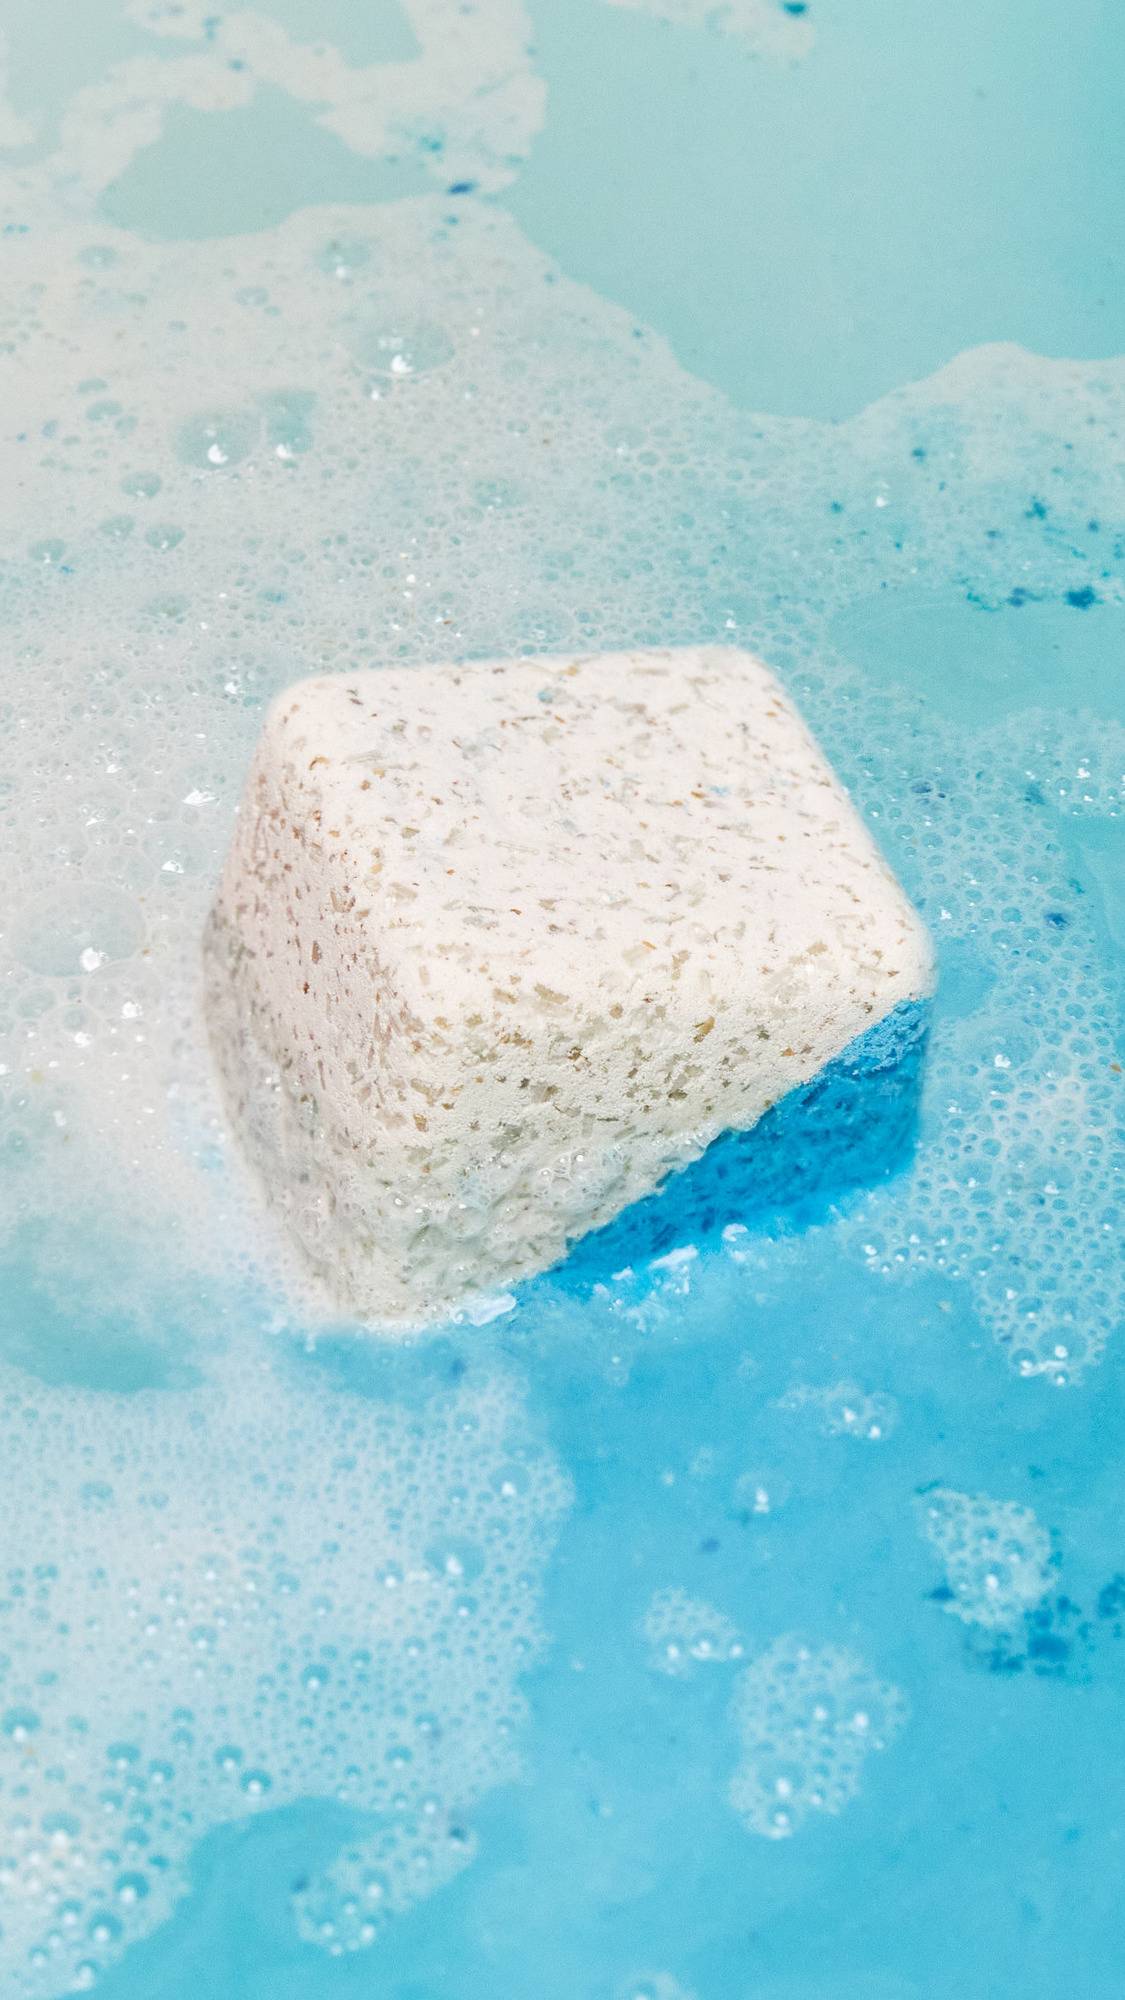 The Dream Cream bath bomb has been placed in the bath water and is giving off delicate swirls of clear blue water and sweet sea foam.